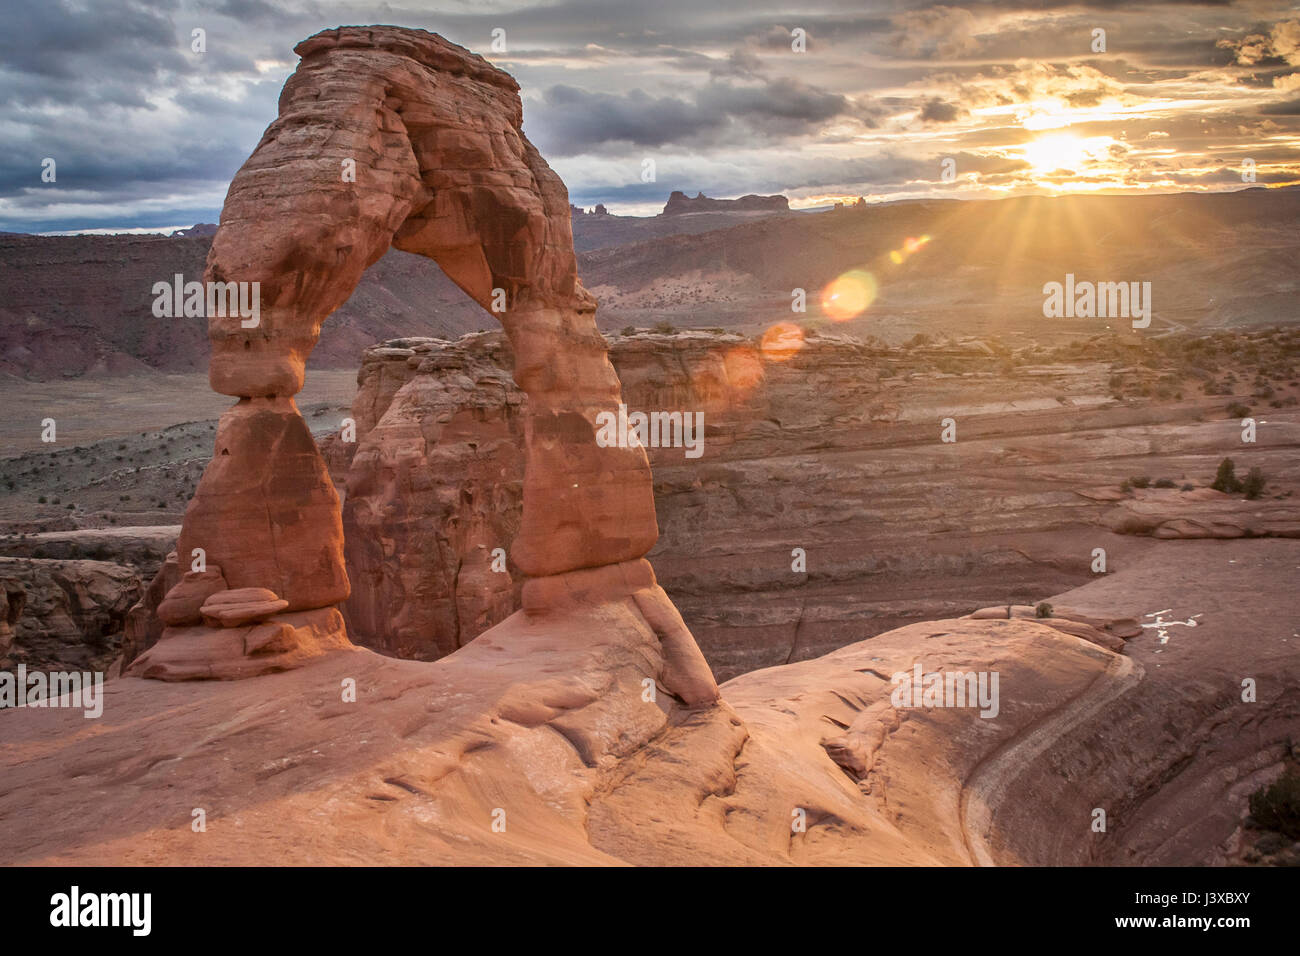 Delicate Arch rock formation in the distance. Arches National Park, Utah, USA. Stock Photo